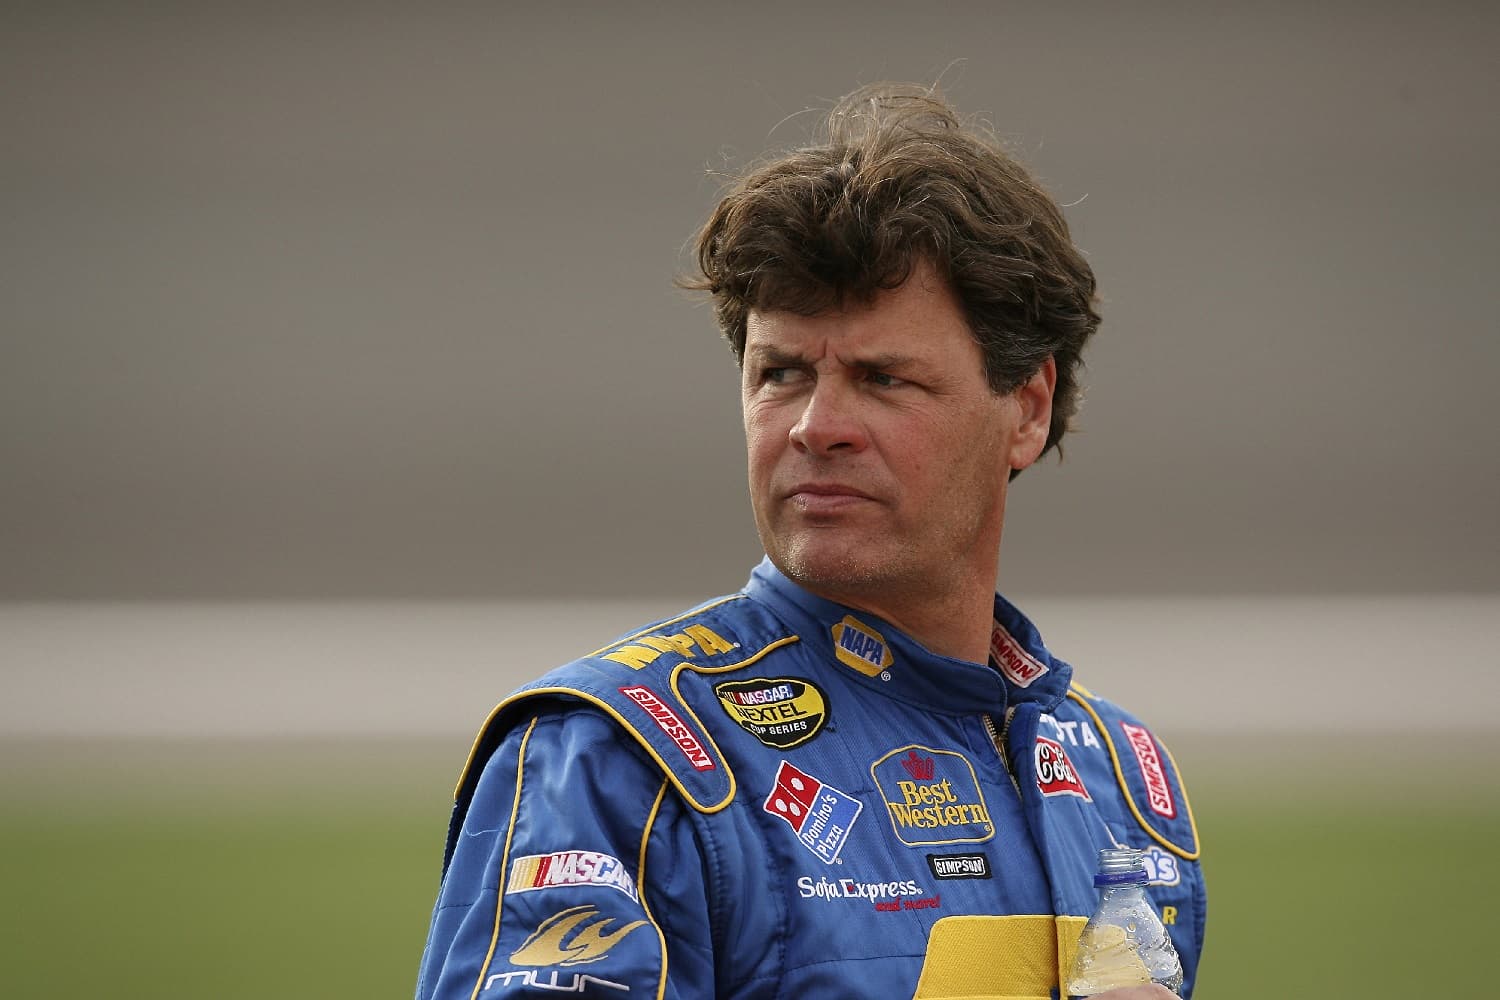 Michael Waltrip on pit lane prior to his qualifications run for the UAW Daimler Chrysler 400 at Las Vegas Motor Speedway on March 9, 2007. | Michael Hickey/WireImage